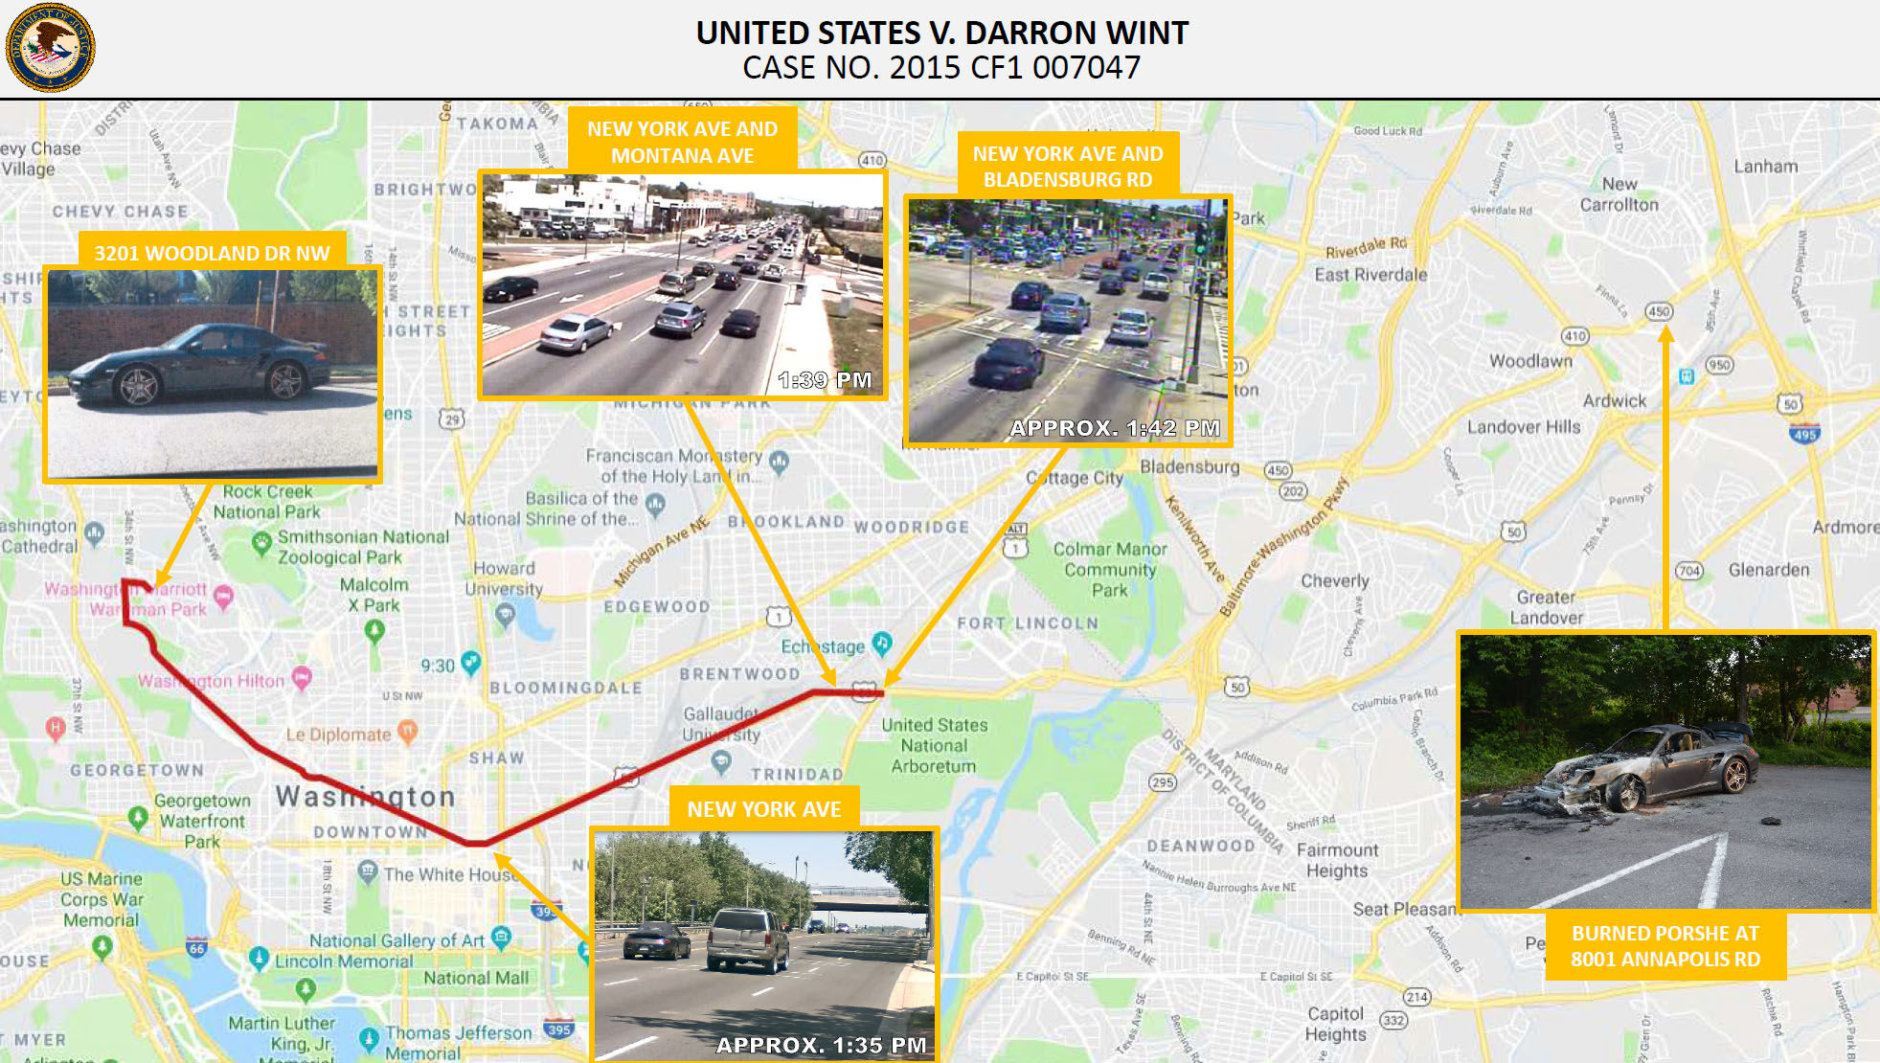 An exhibit from the U.S. Attorney's Office tracking showing footage from traffic cameras that captured Amy Savopoulos' blue Porsche being driven out of D.C. and into Prince George's County where it was later found set on fire. (Courtey U.S. Attorney's Office for D.C.)